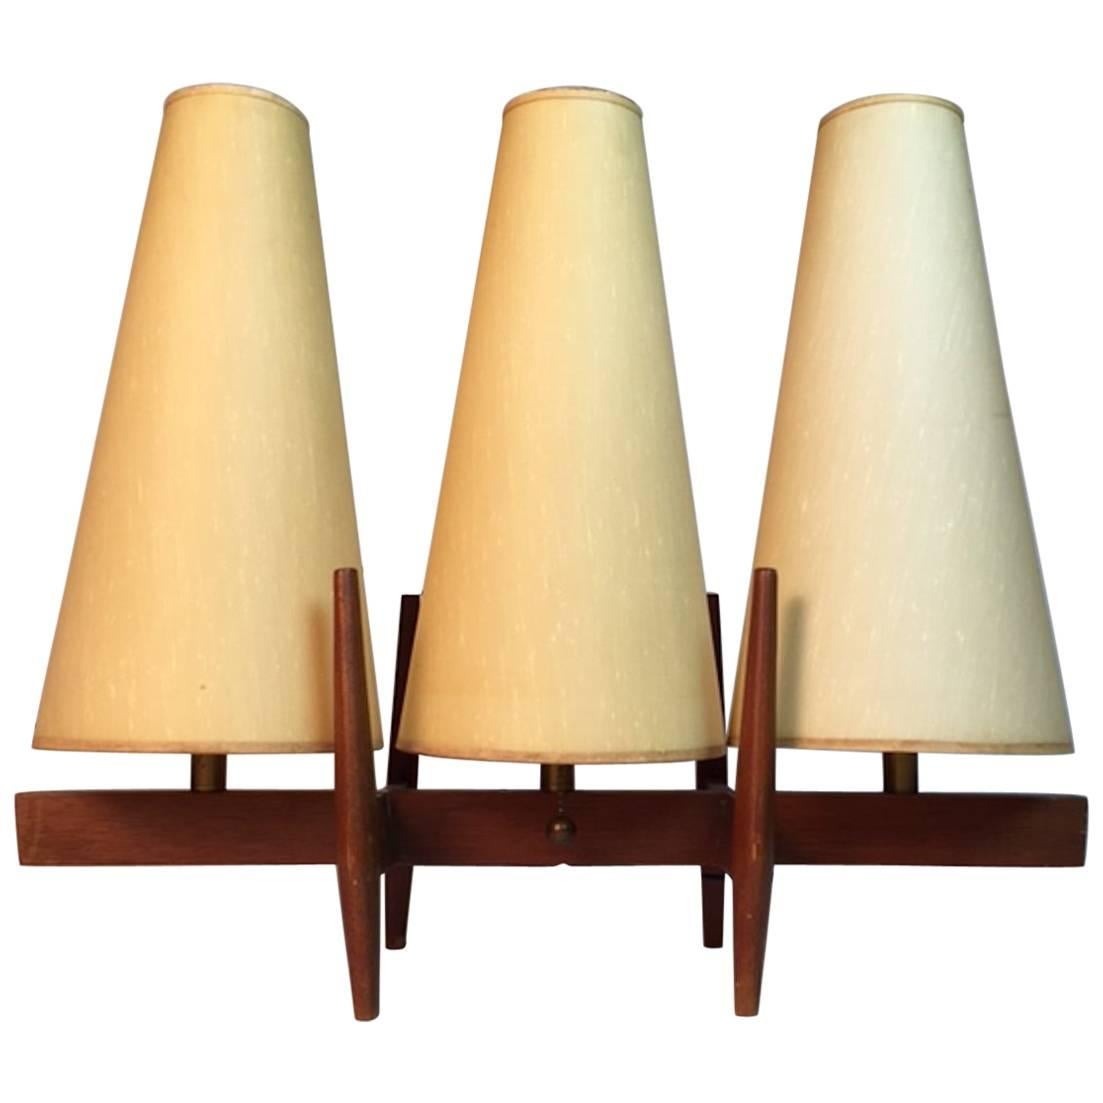 Unique Three-Shade Danish Modern Table Lamp For Sale